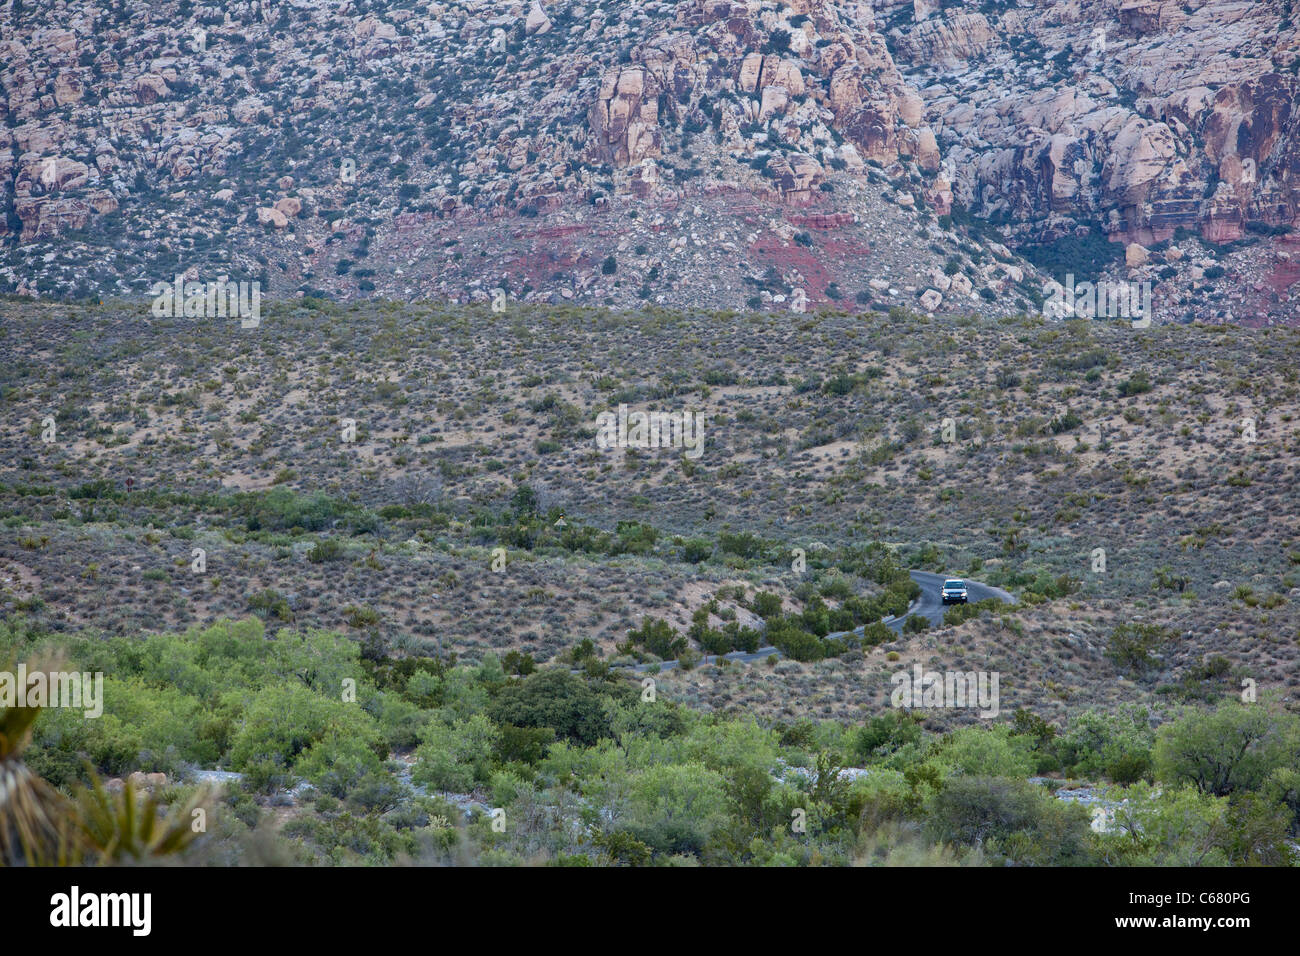 Las Vegas, Nevada - A car on the scenic drive in Red Rock Canyon. Stock Photo